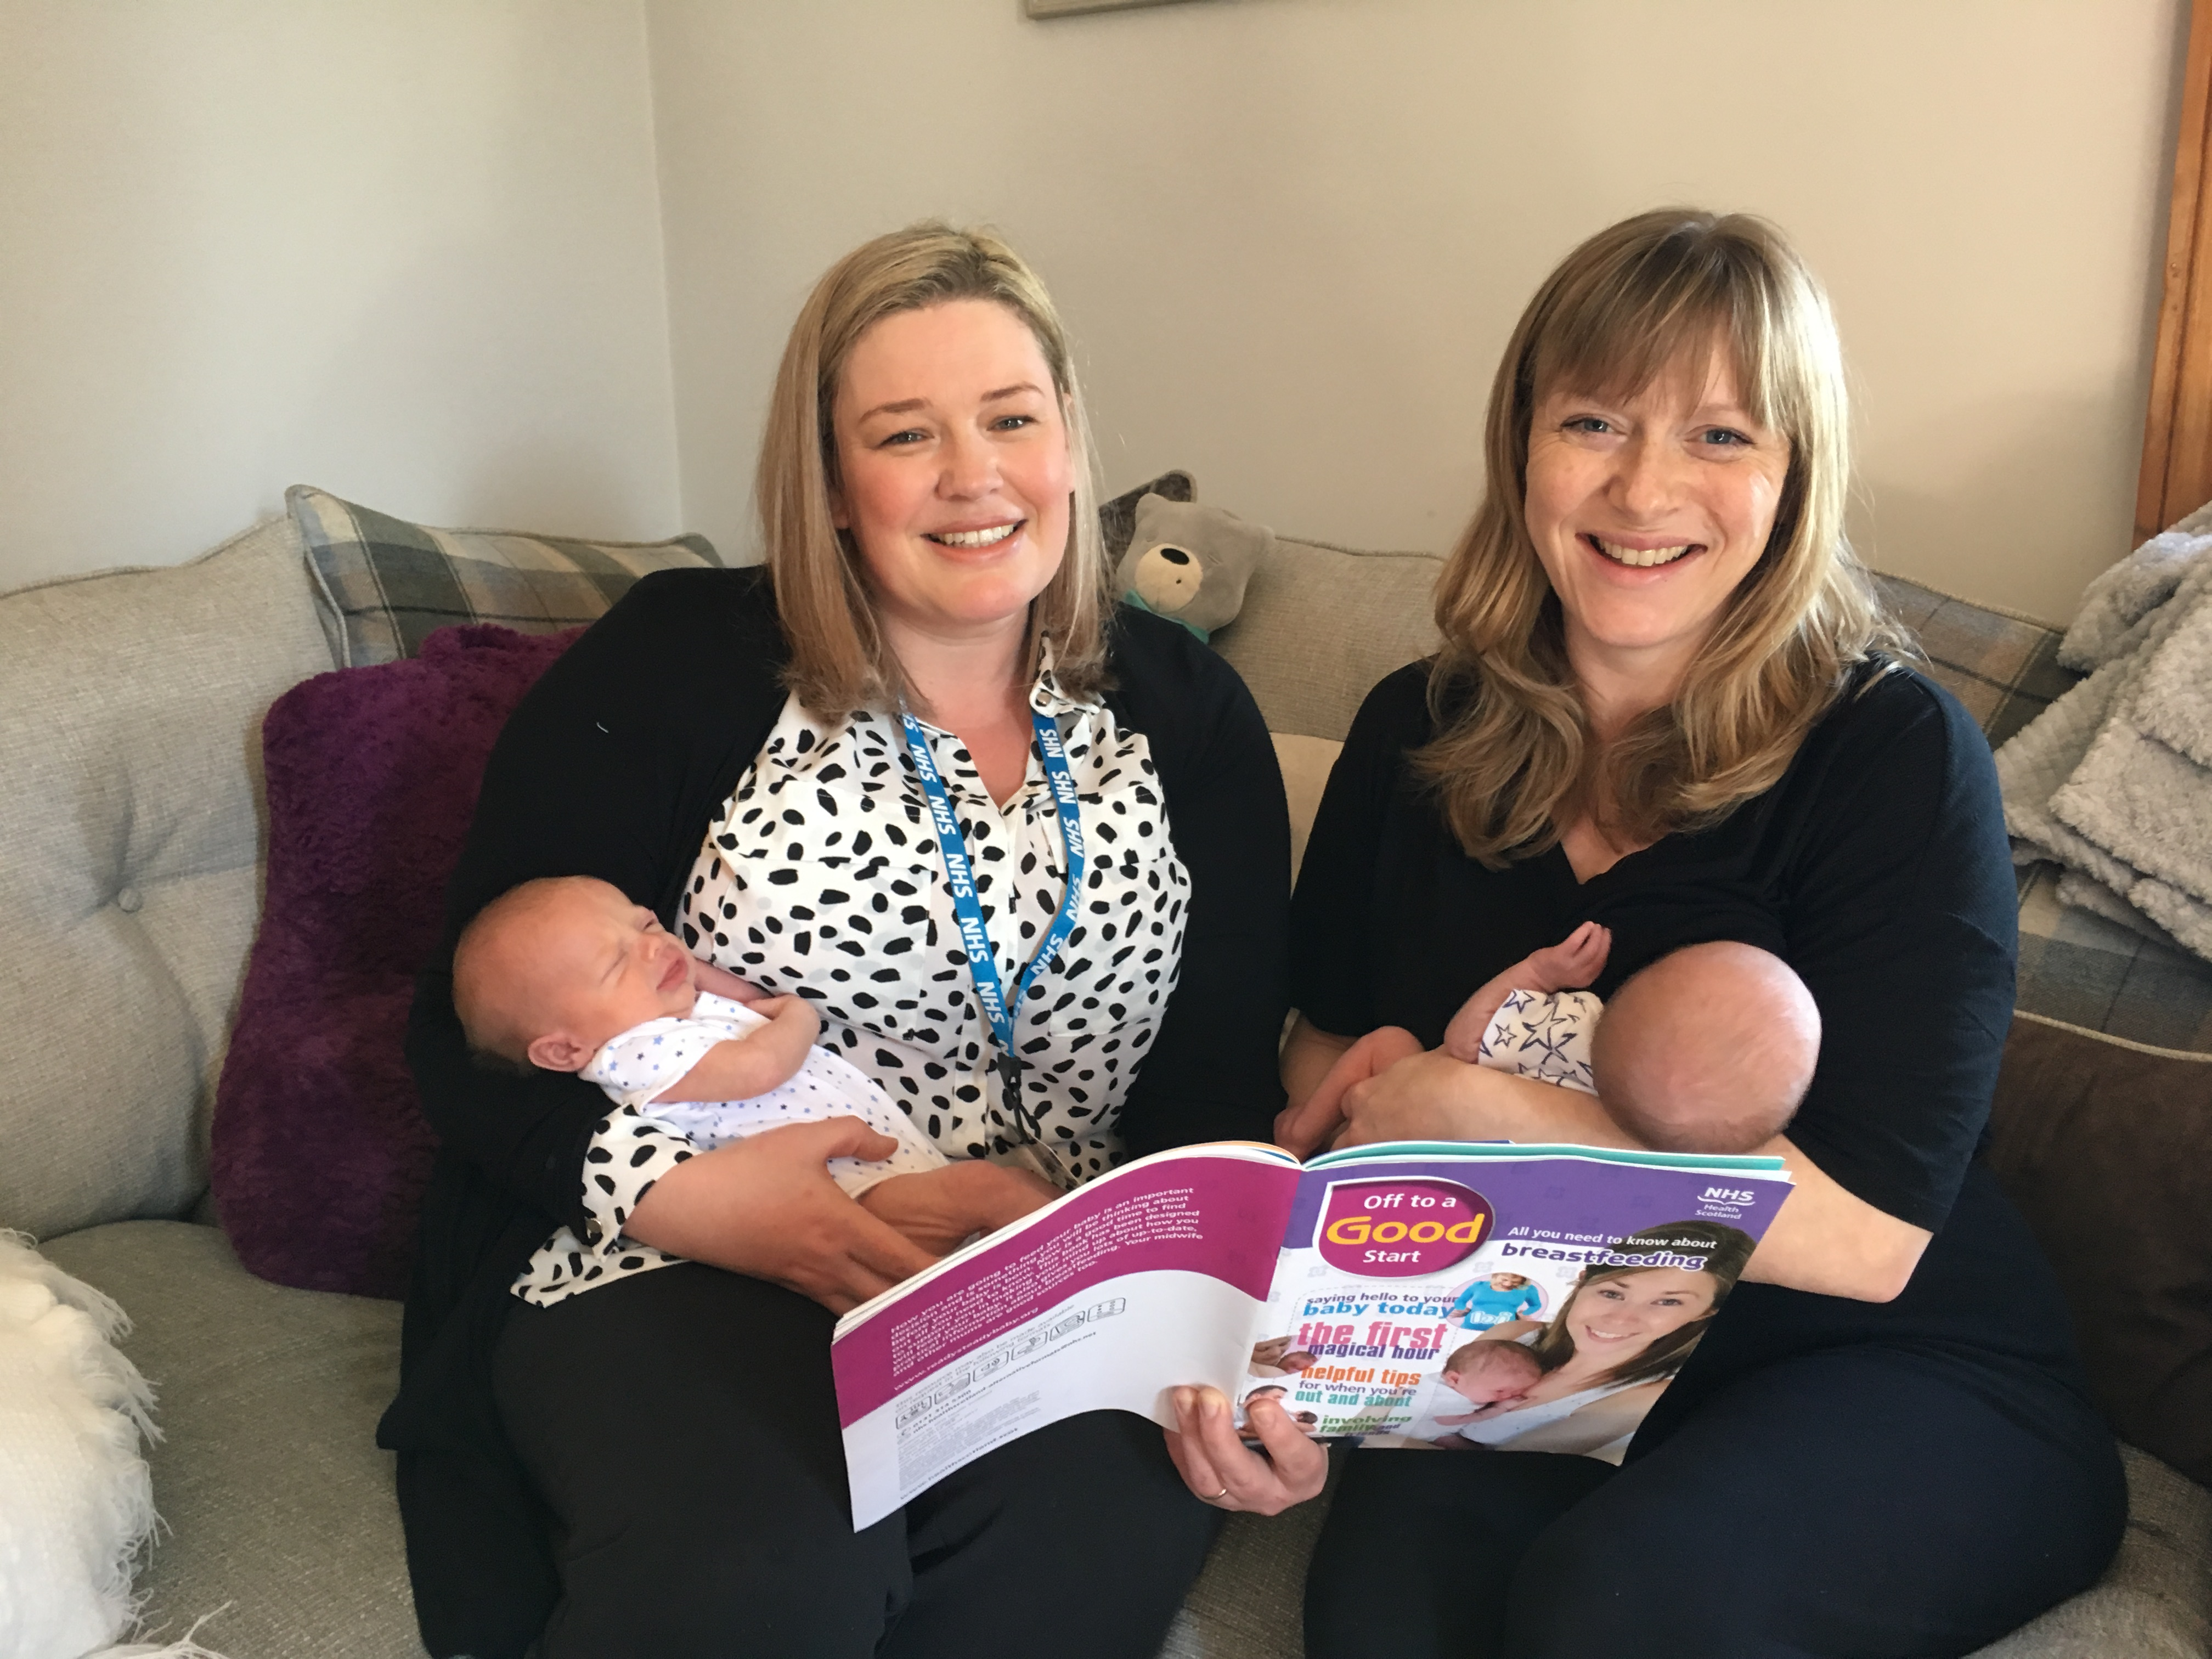 Trainee health visitor Annmarie Smith pictured on the left holding baby Eddie Gray and Michelle Leye (Mum) on the right breastfeeding his brother William Gray